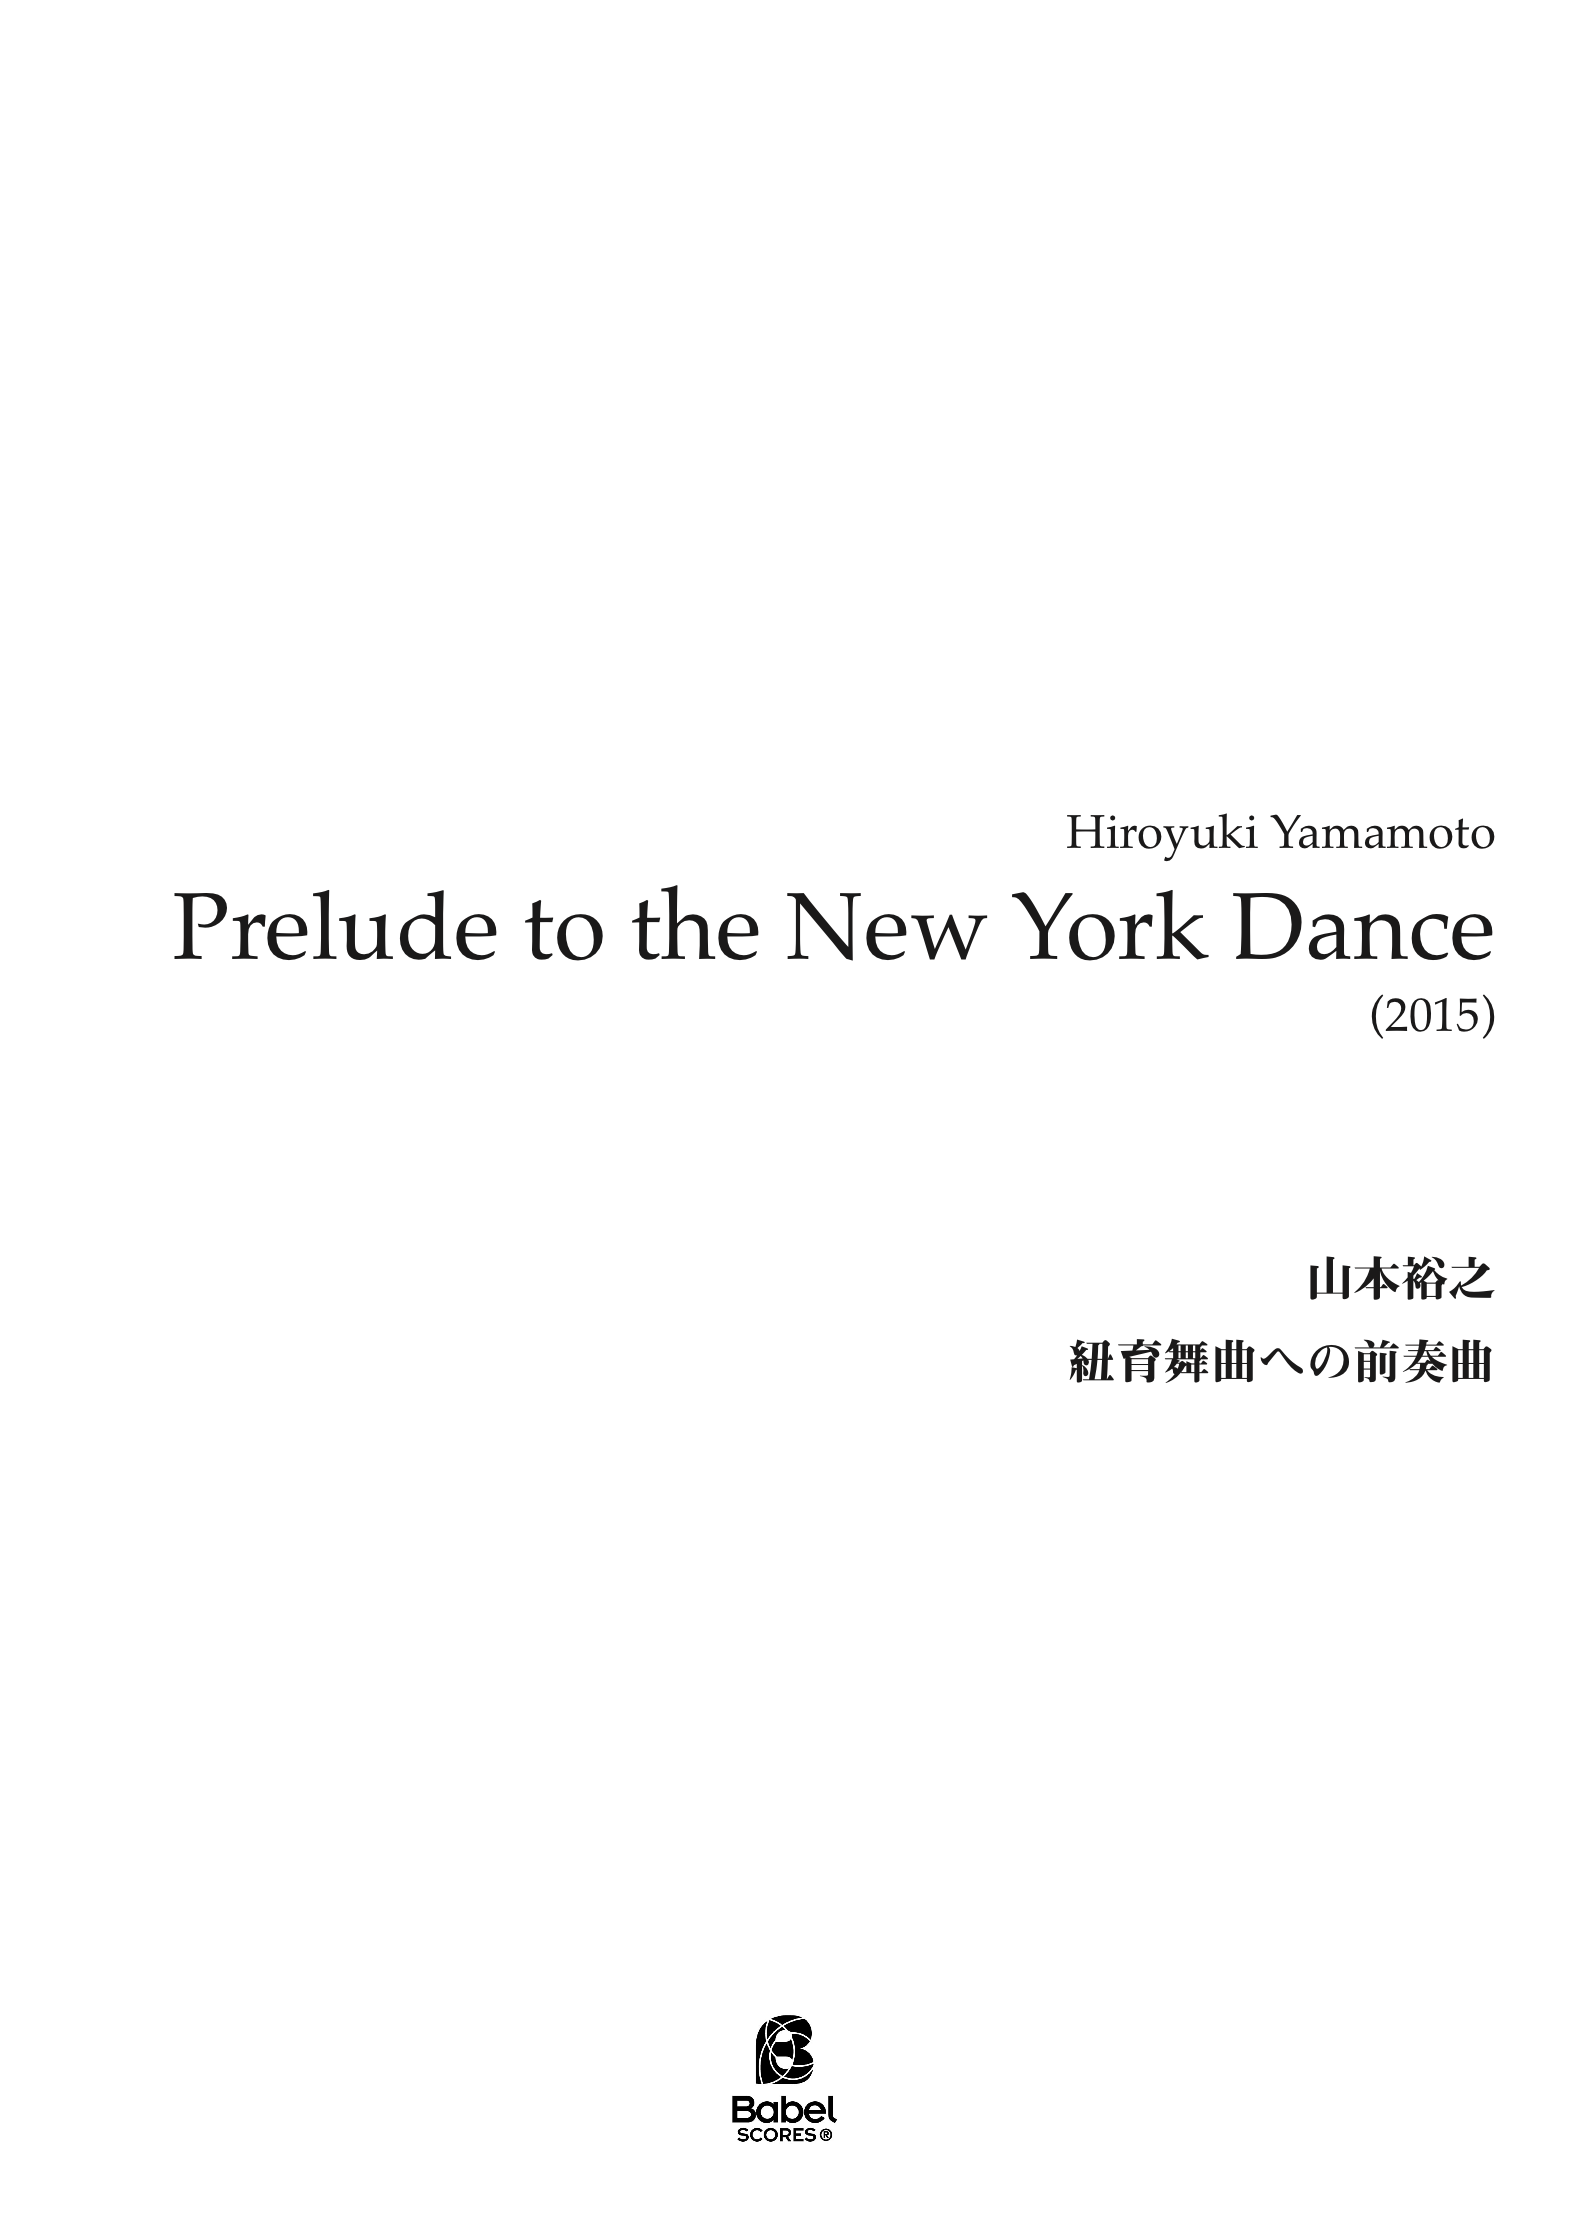 prelude to the NY dance A4 z 2 294 1 191